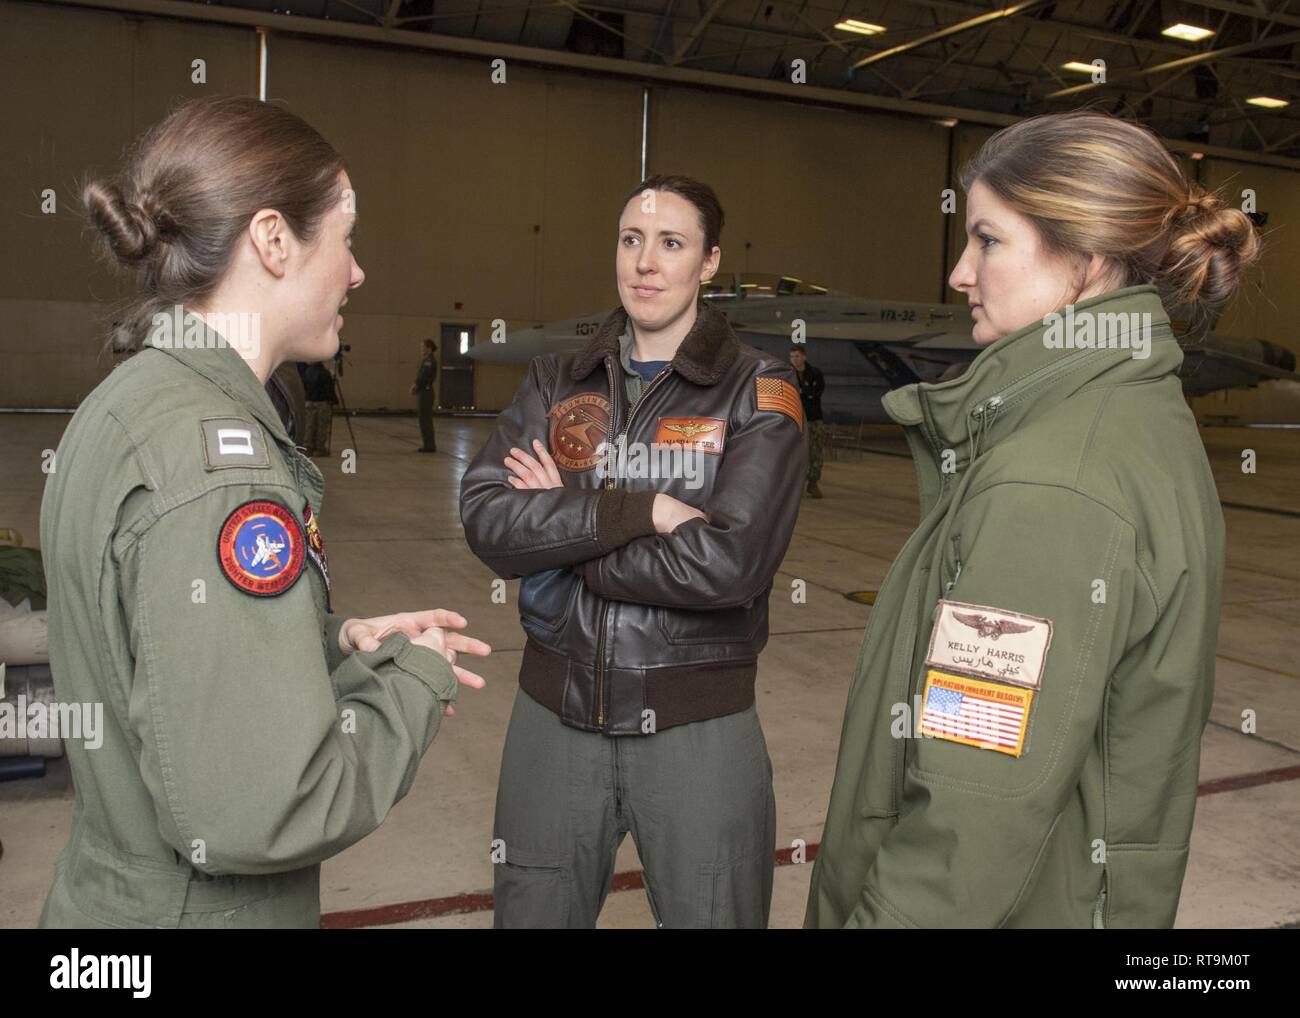 NAVAL AIR STATION OCEANA (Jan. 31, 2019) Lt. Emily Rixey, left, Lt. Amanda  Lee, middle, and Lt. Kelly Harris, right, talk to each other in a hangar  bay on Naval Station Oceana.